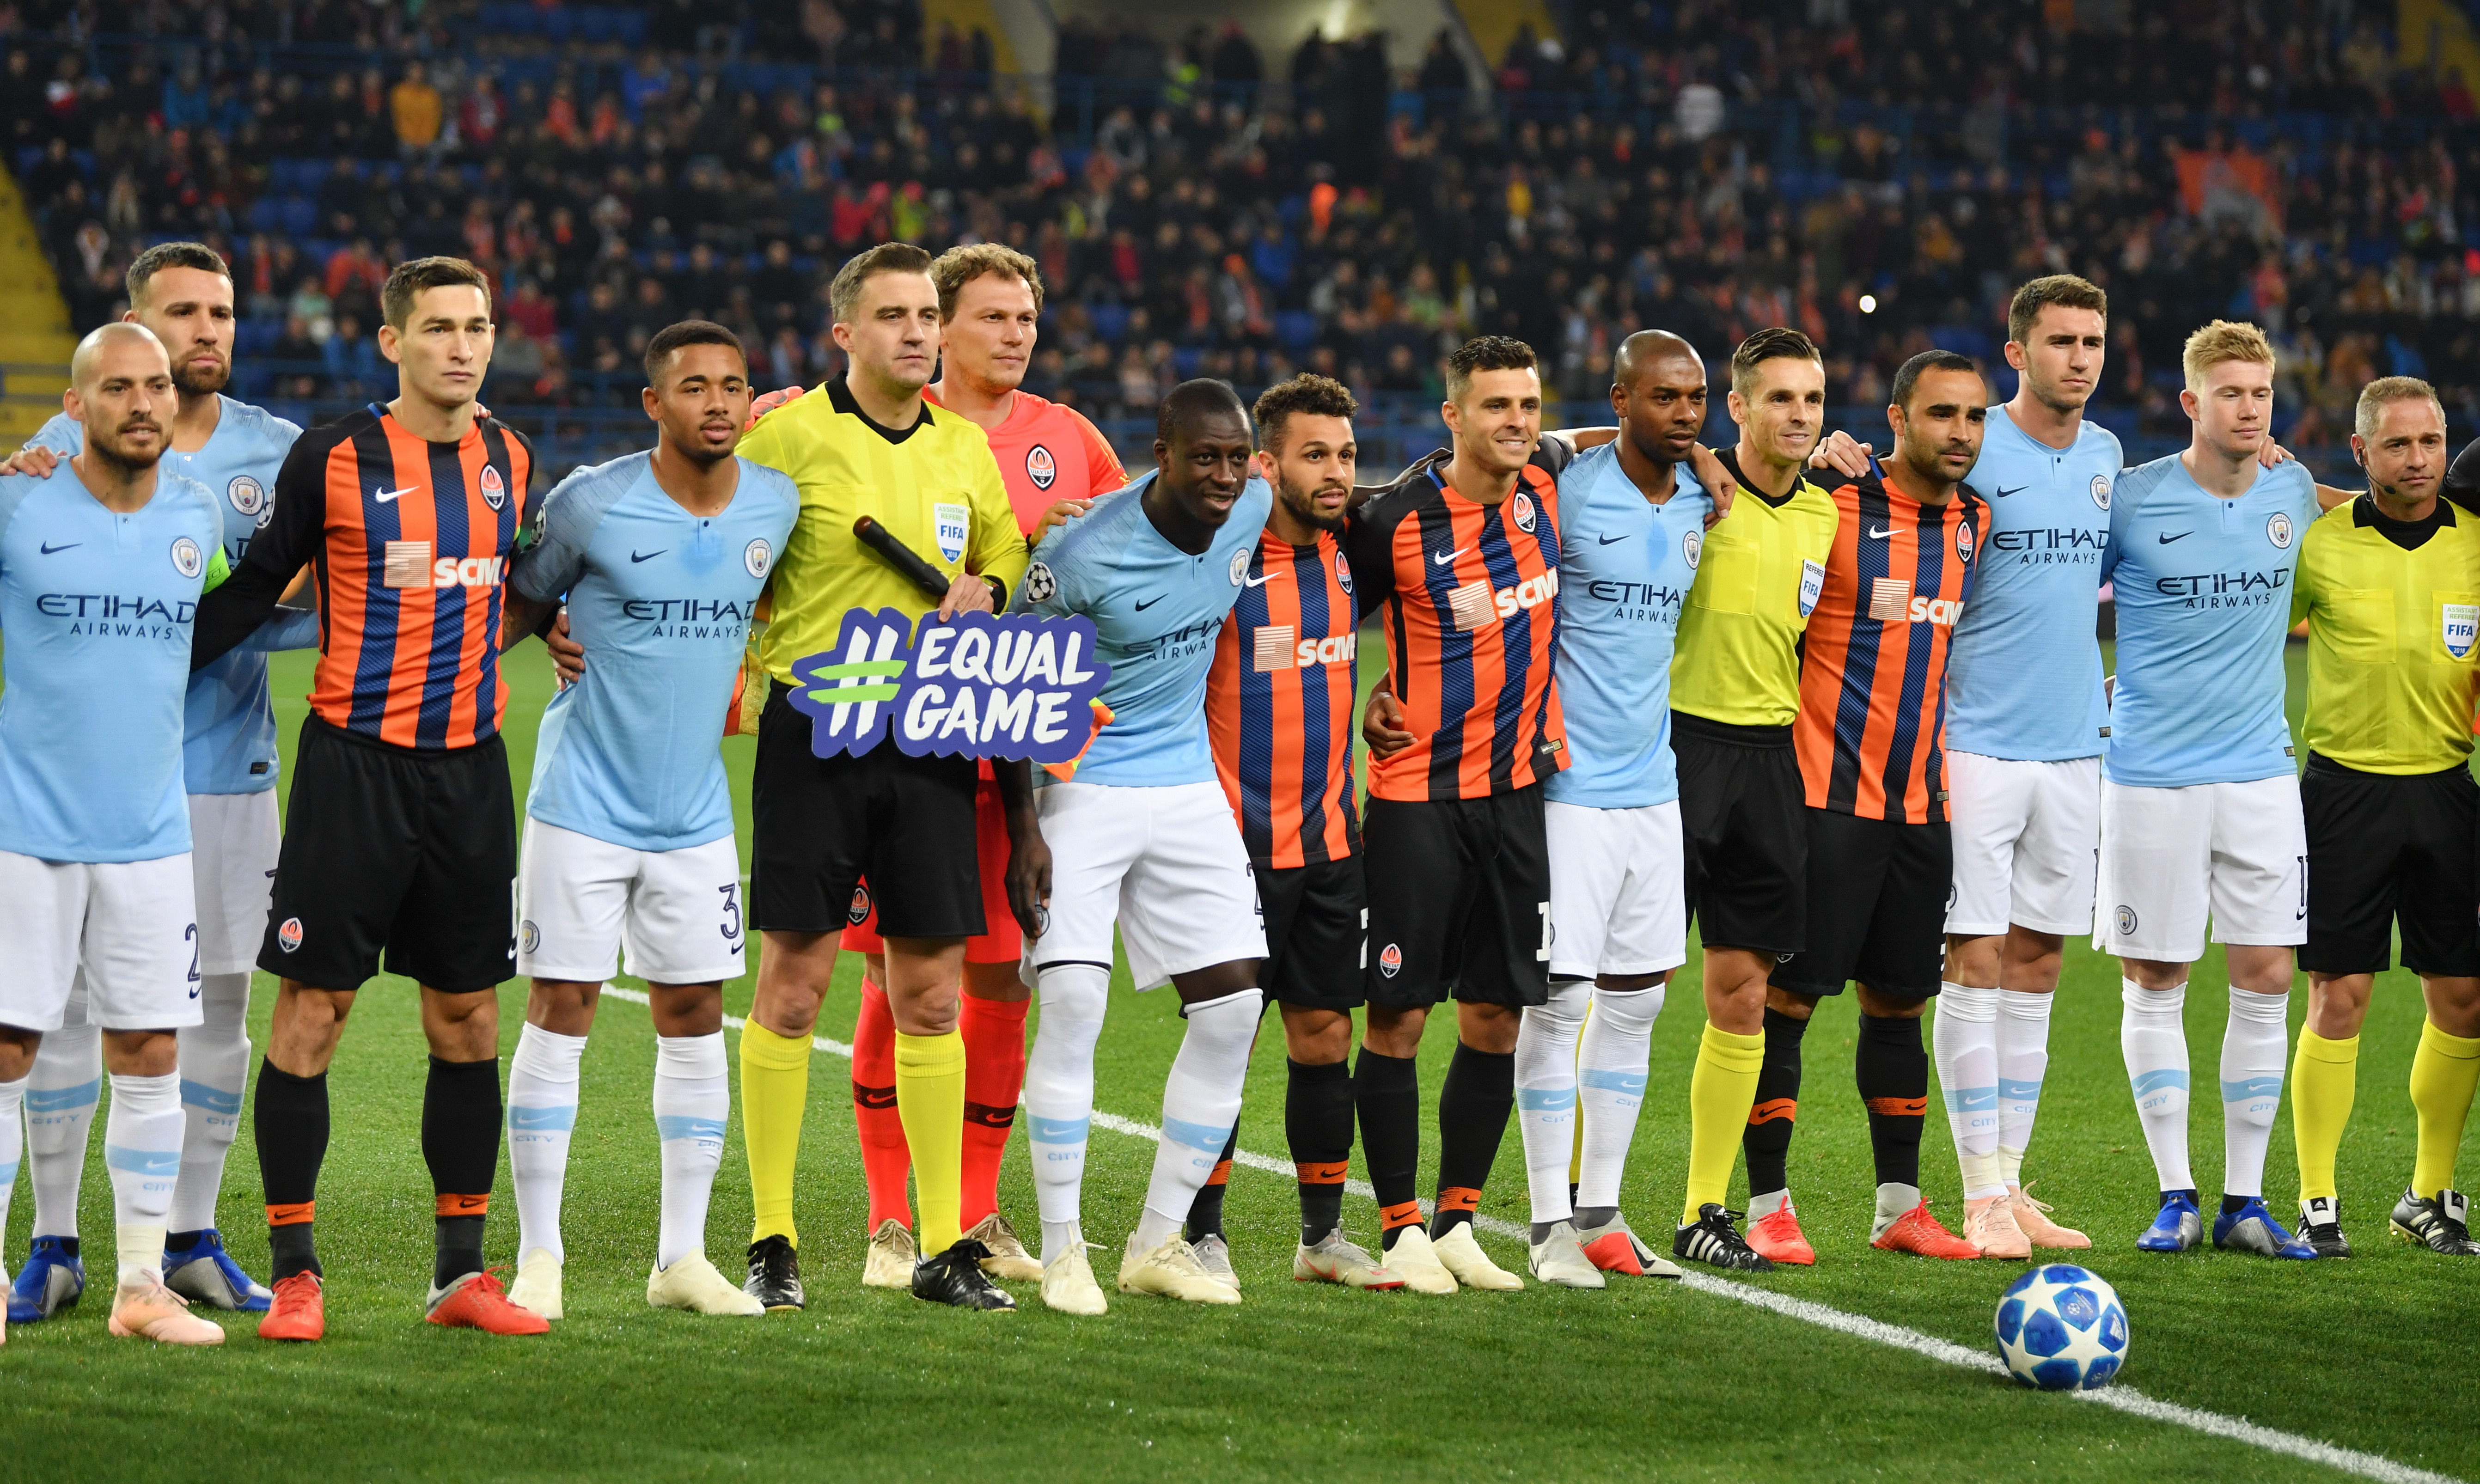 KHARKOV, UKRAINE - OCTOBER 23:  Manchester City and Shakhtar Donetsk players link together prior to the Group F match of the UEFA Champions League between FC Shakhtar Donetsk and Manchester City at Metalist Stadium on October 23, 2018 in Kharkov, Ukraine.  (Photo by Mike Hewitt/Getty Images)